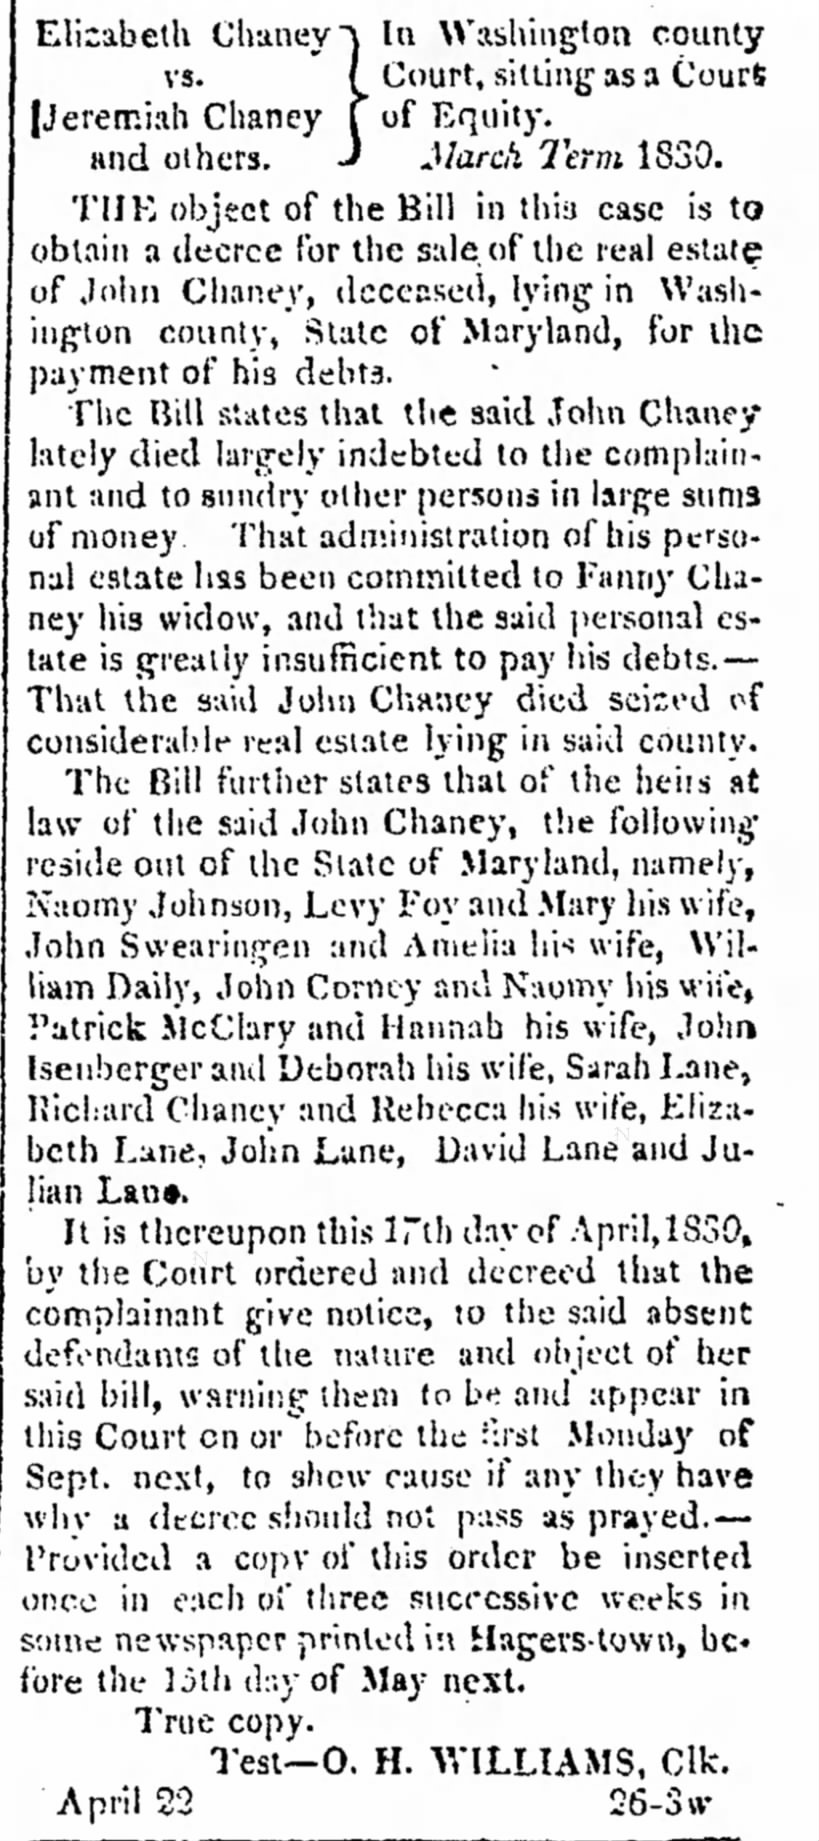 Bill for sale of land - Elizabeth Chaney vs Jeremiah Chaney and others Term March 1830
Chaney/Steve